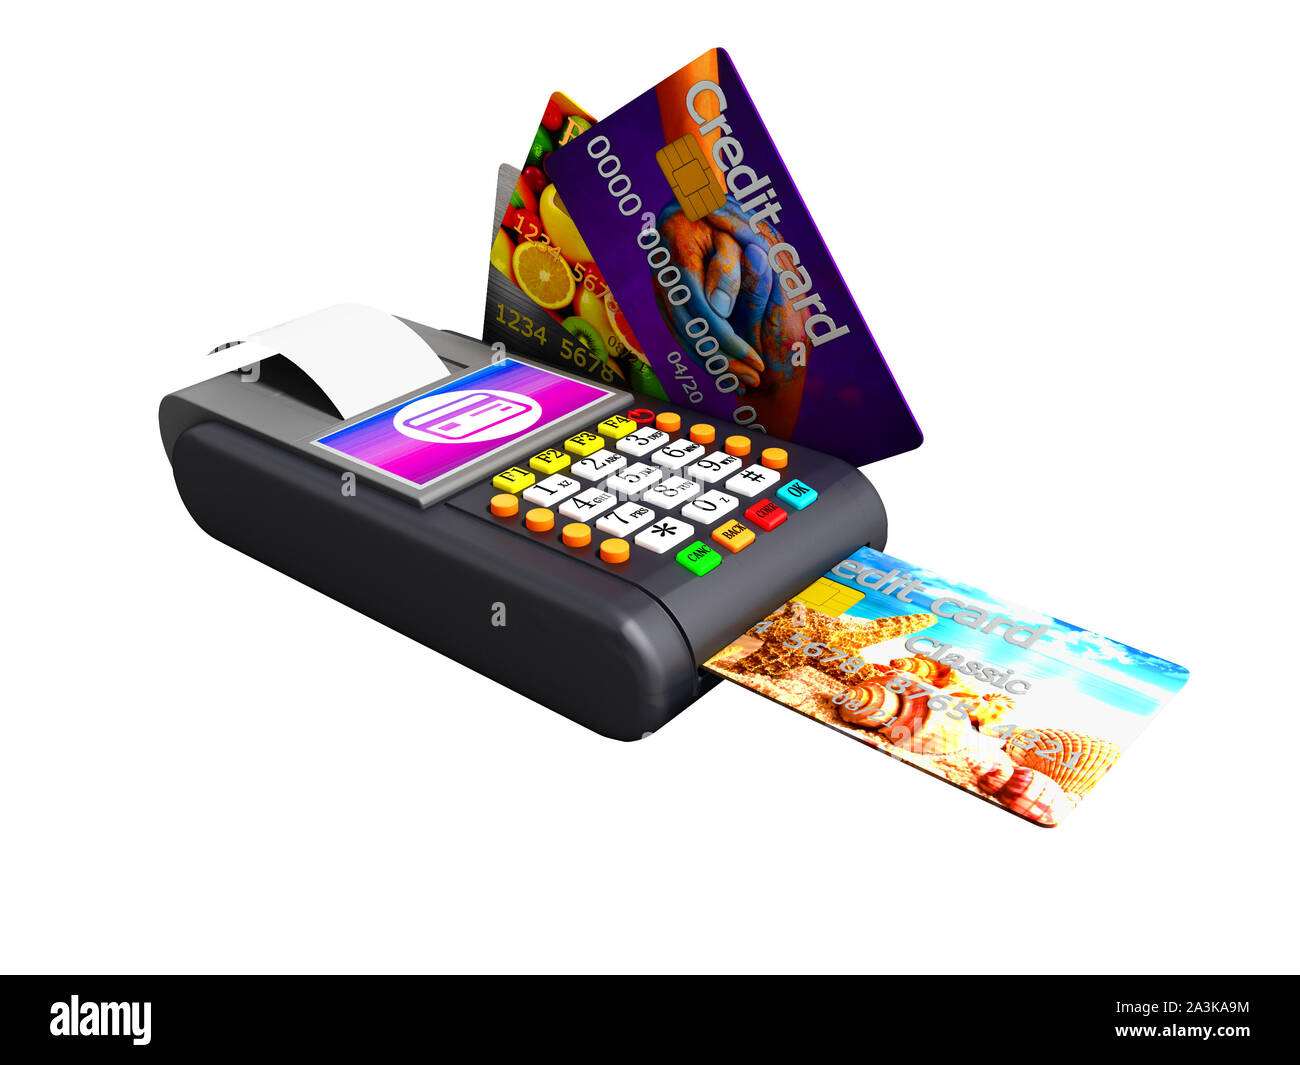 Modern Nfs payment on payment card POS-terminal with credit card inside and outside the left view 3d render on white background no shadow Stock Photo